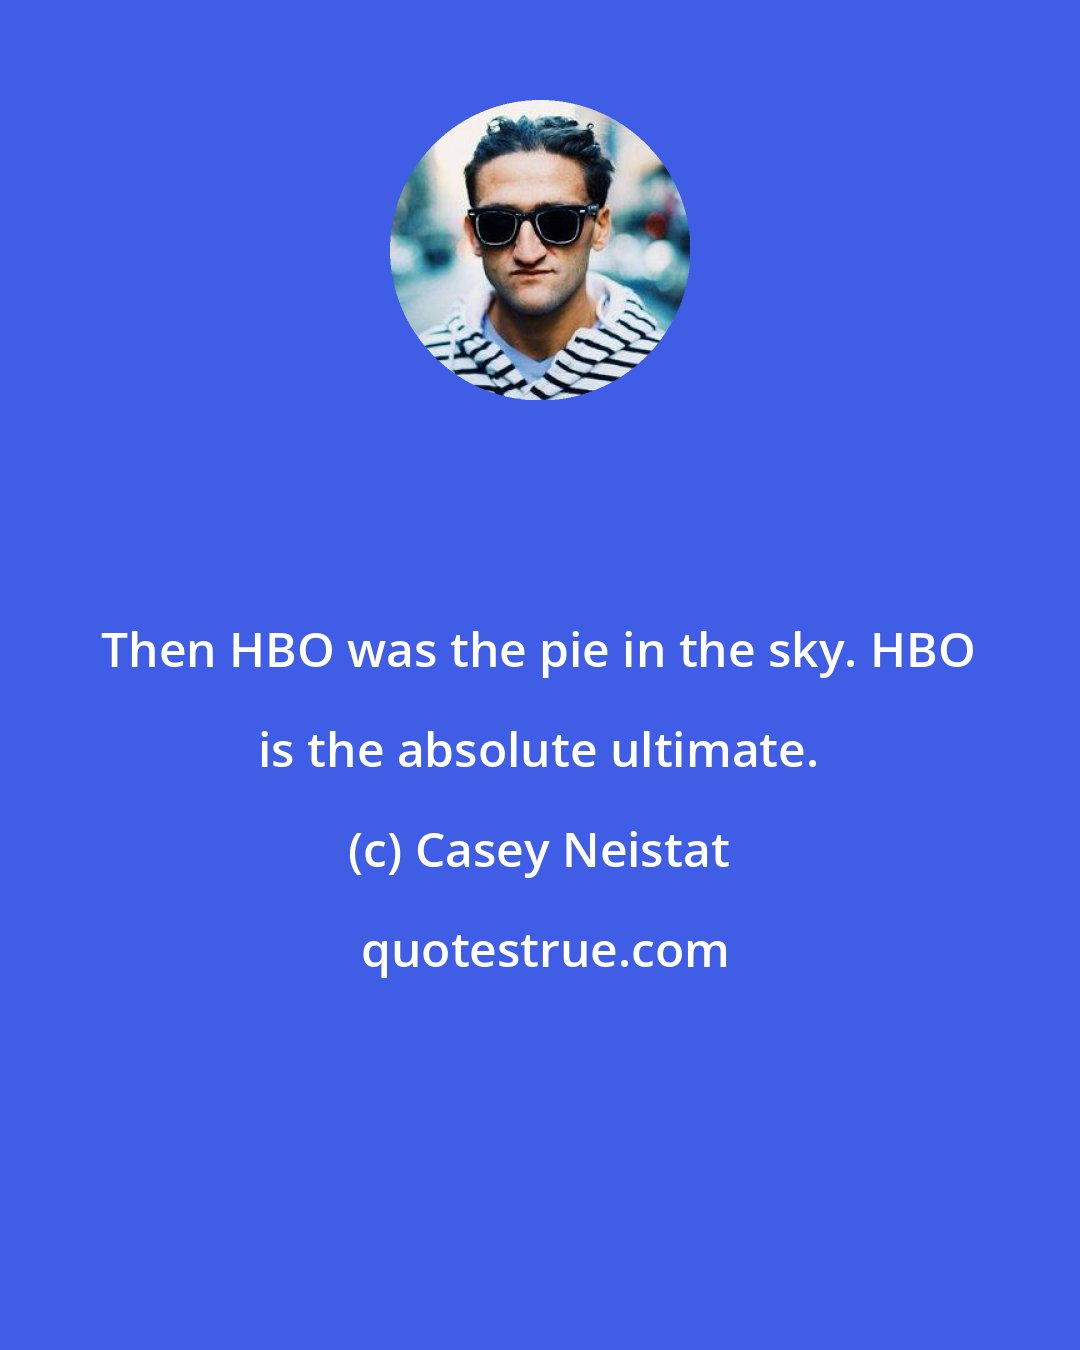 Casey Neistat: Then HBO was the pie in the sky. HBO is the absolute ultimate.